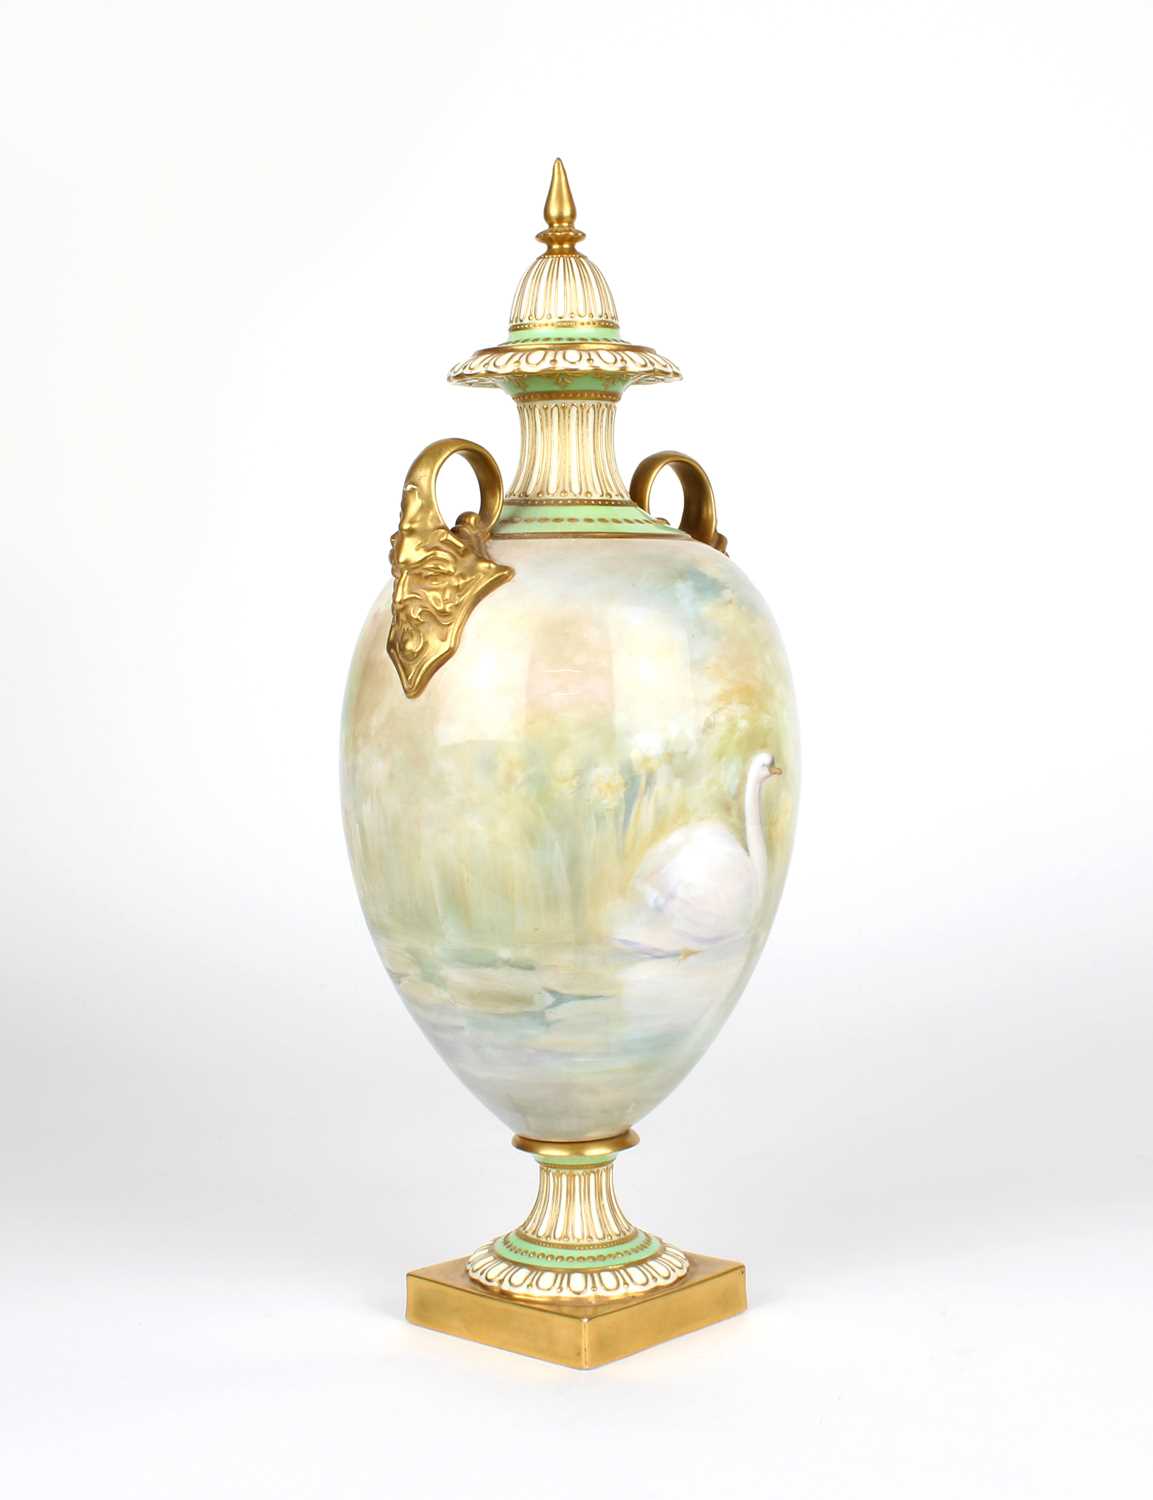 George White for Royal Doulton "Leda and the Swan" Urn - Image 4 of 20